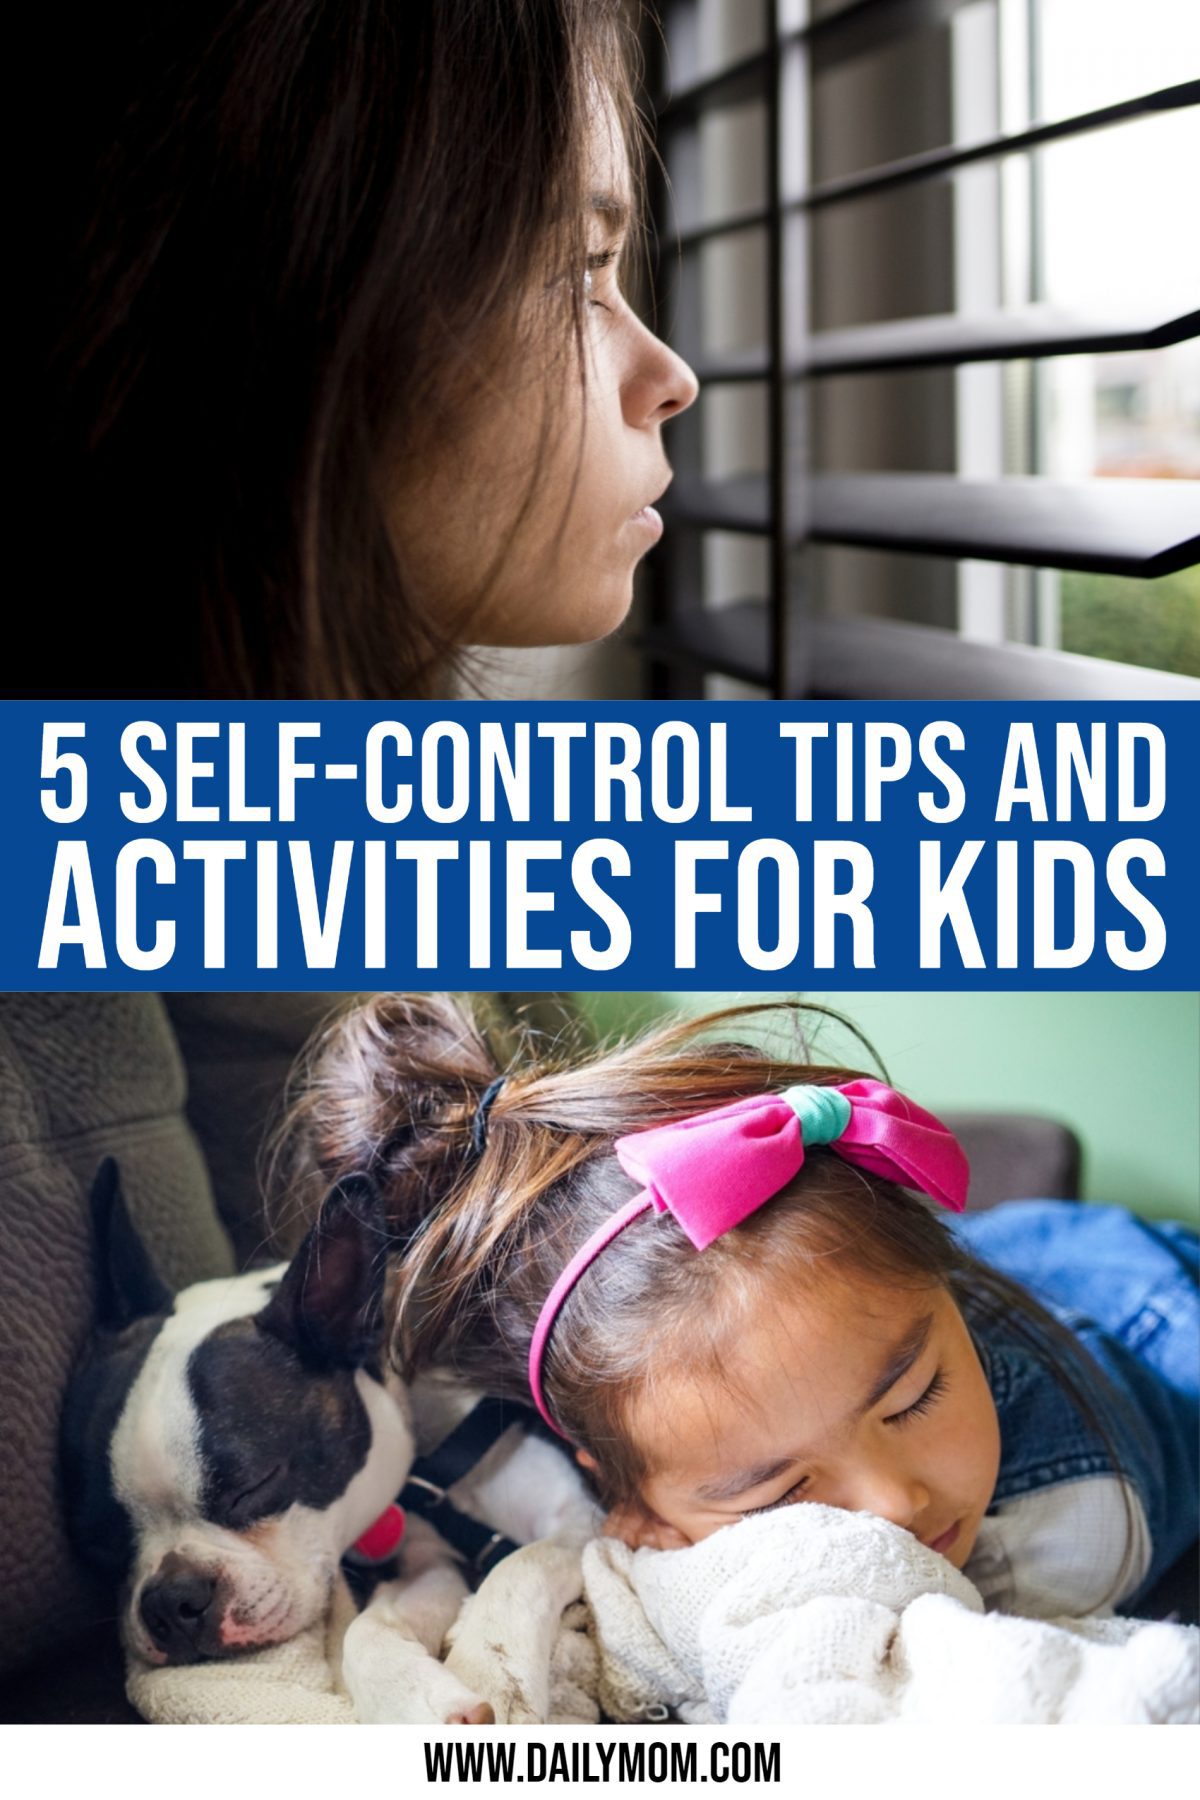 5 Self-control Tips And Activities For Kids